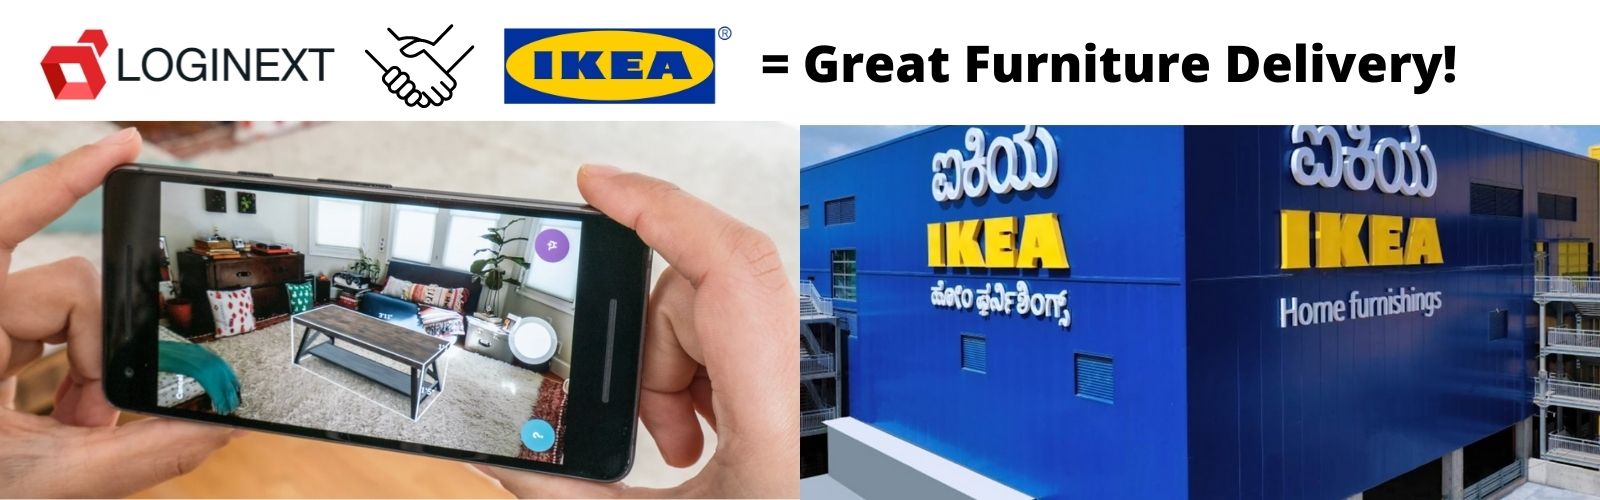 IKEA ties up with LogiNext to give a great furniture delivery experience